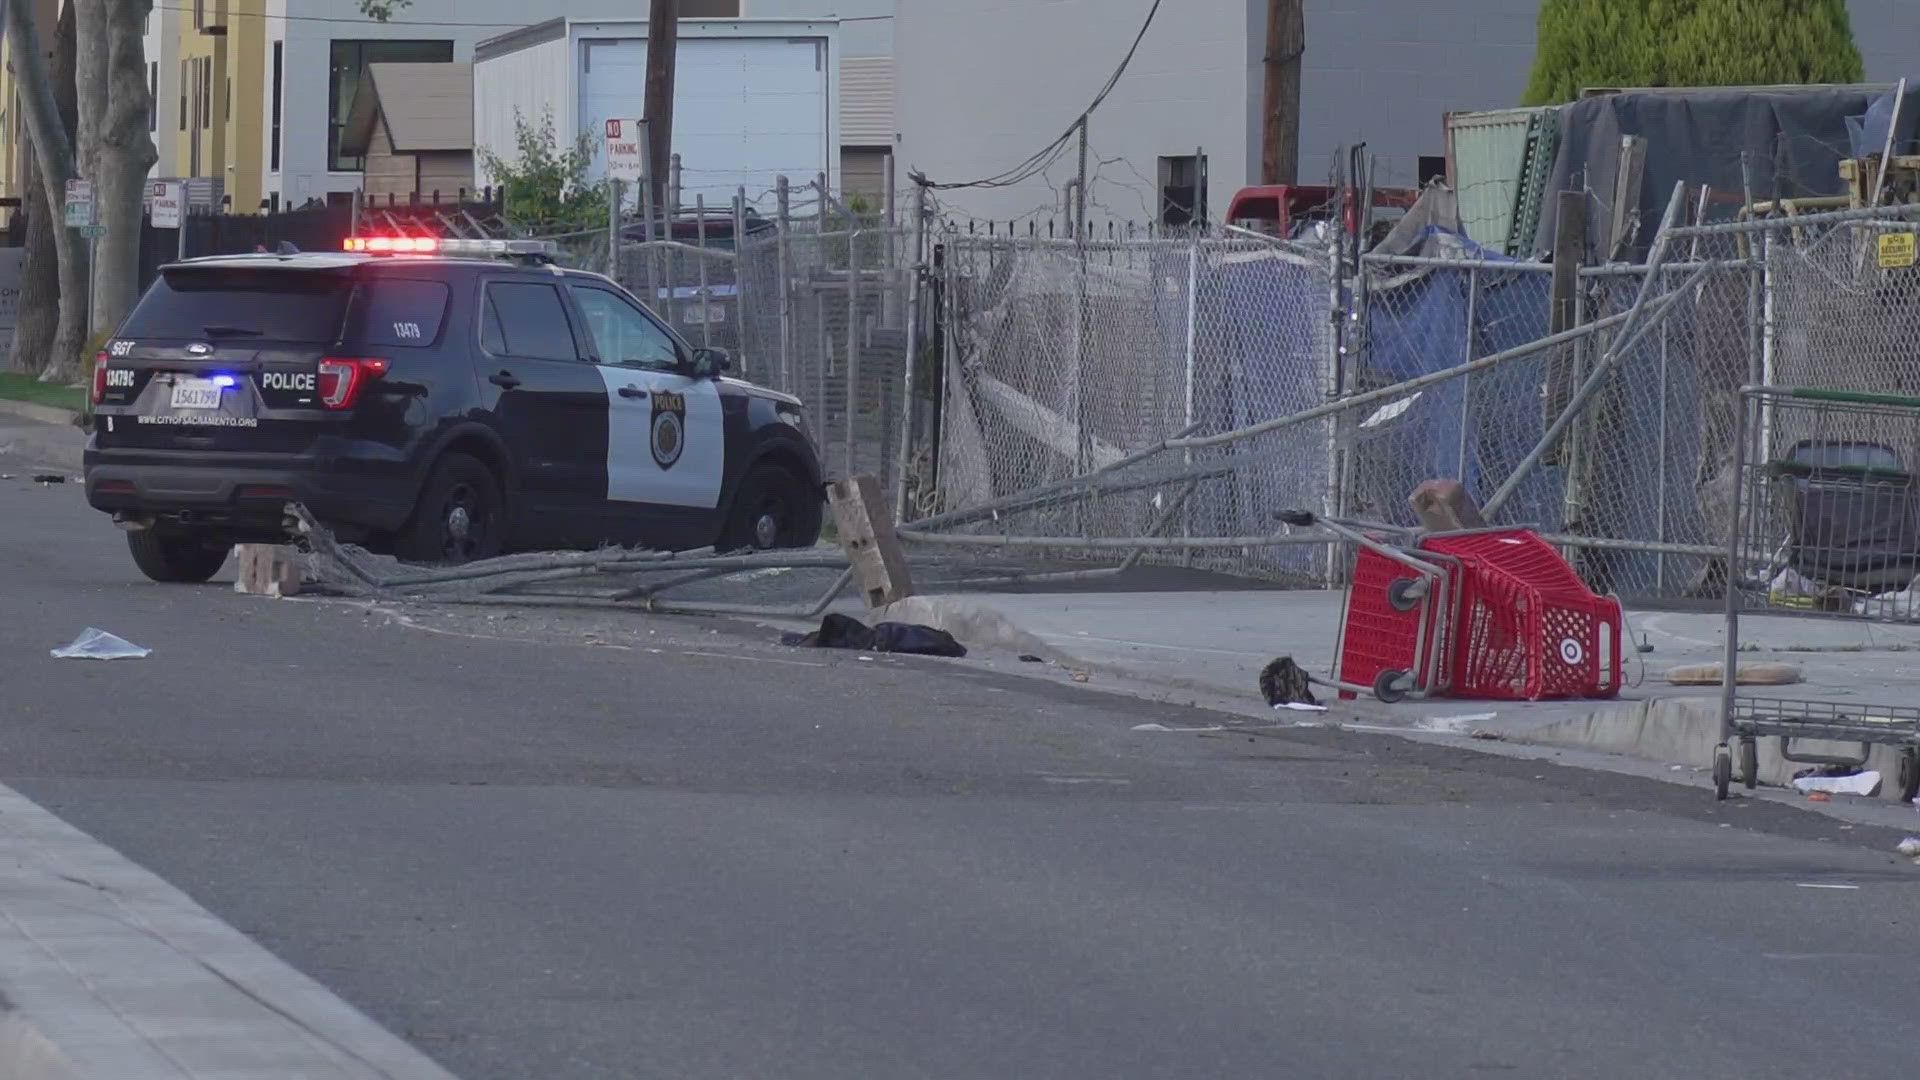 Three pedestrians were taken to the hospital after they were hit by a vehicle in Sacramento.